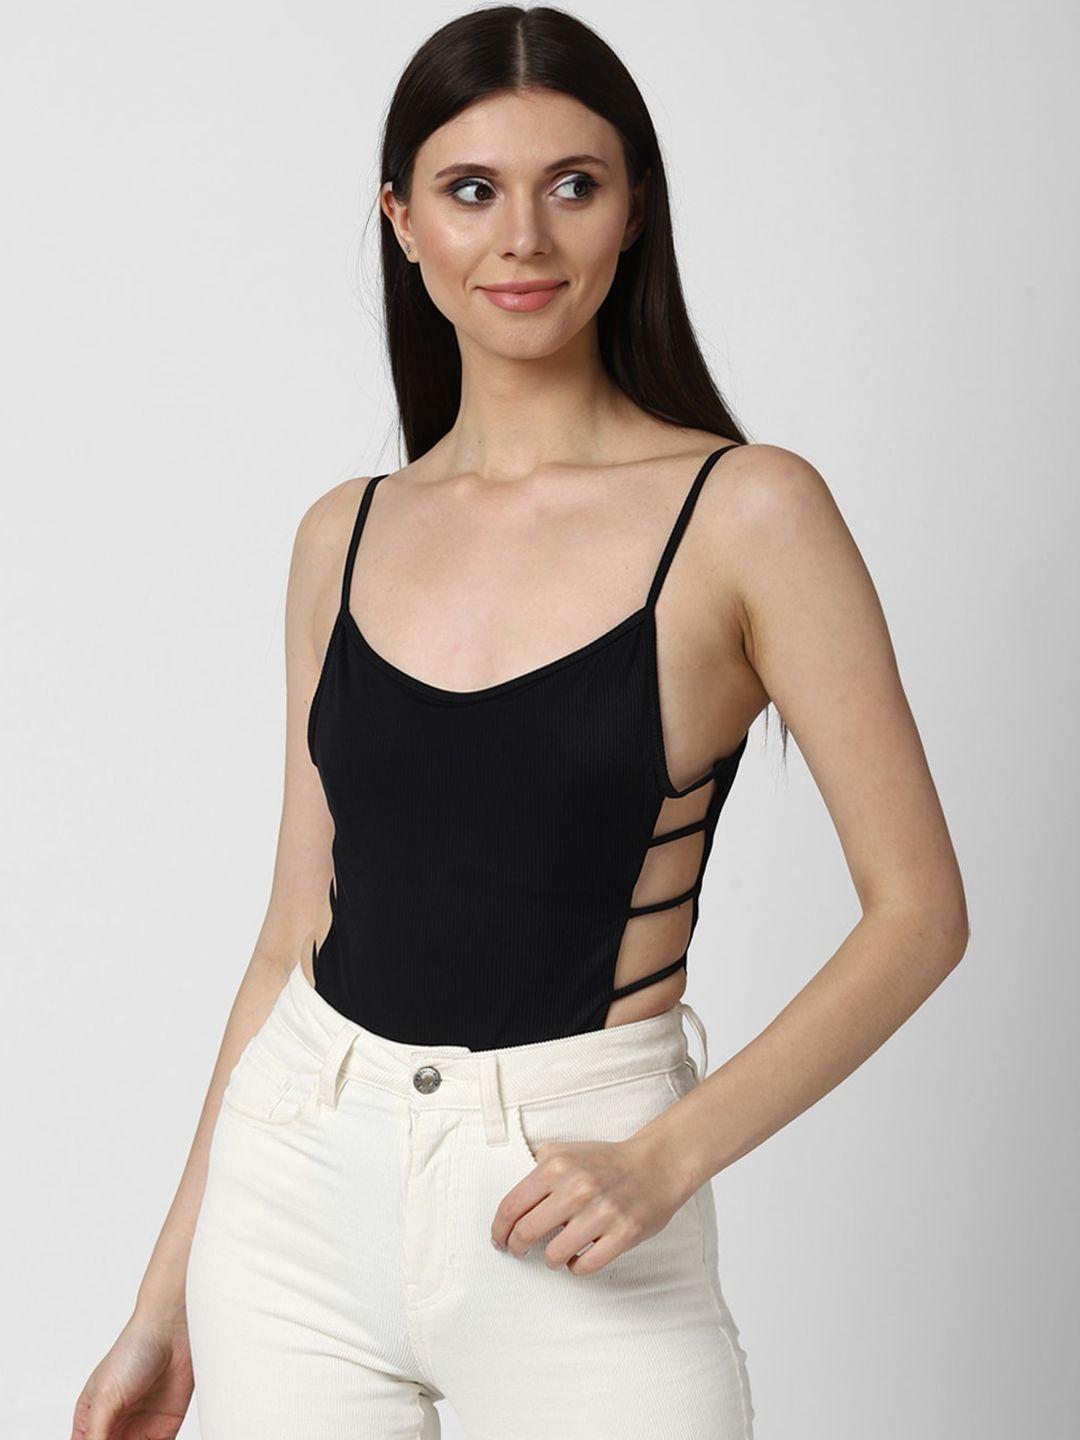 forever 21 women black solid cut out body suit